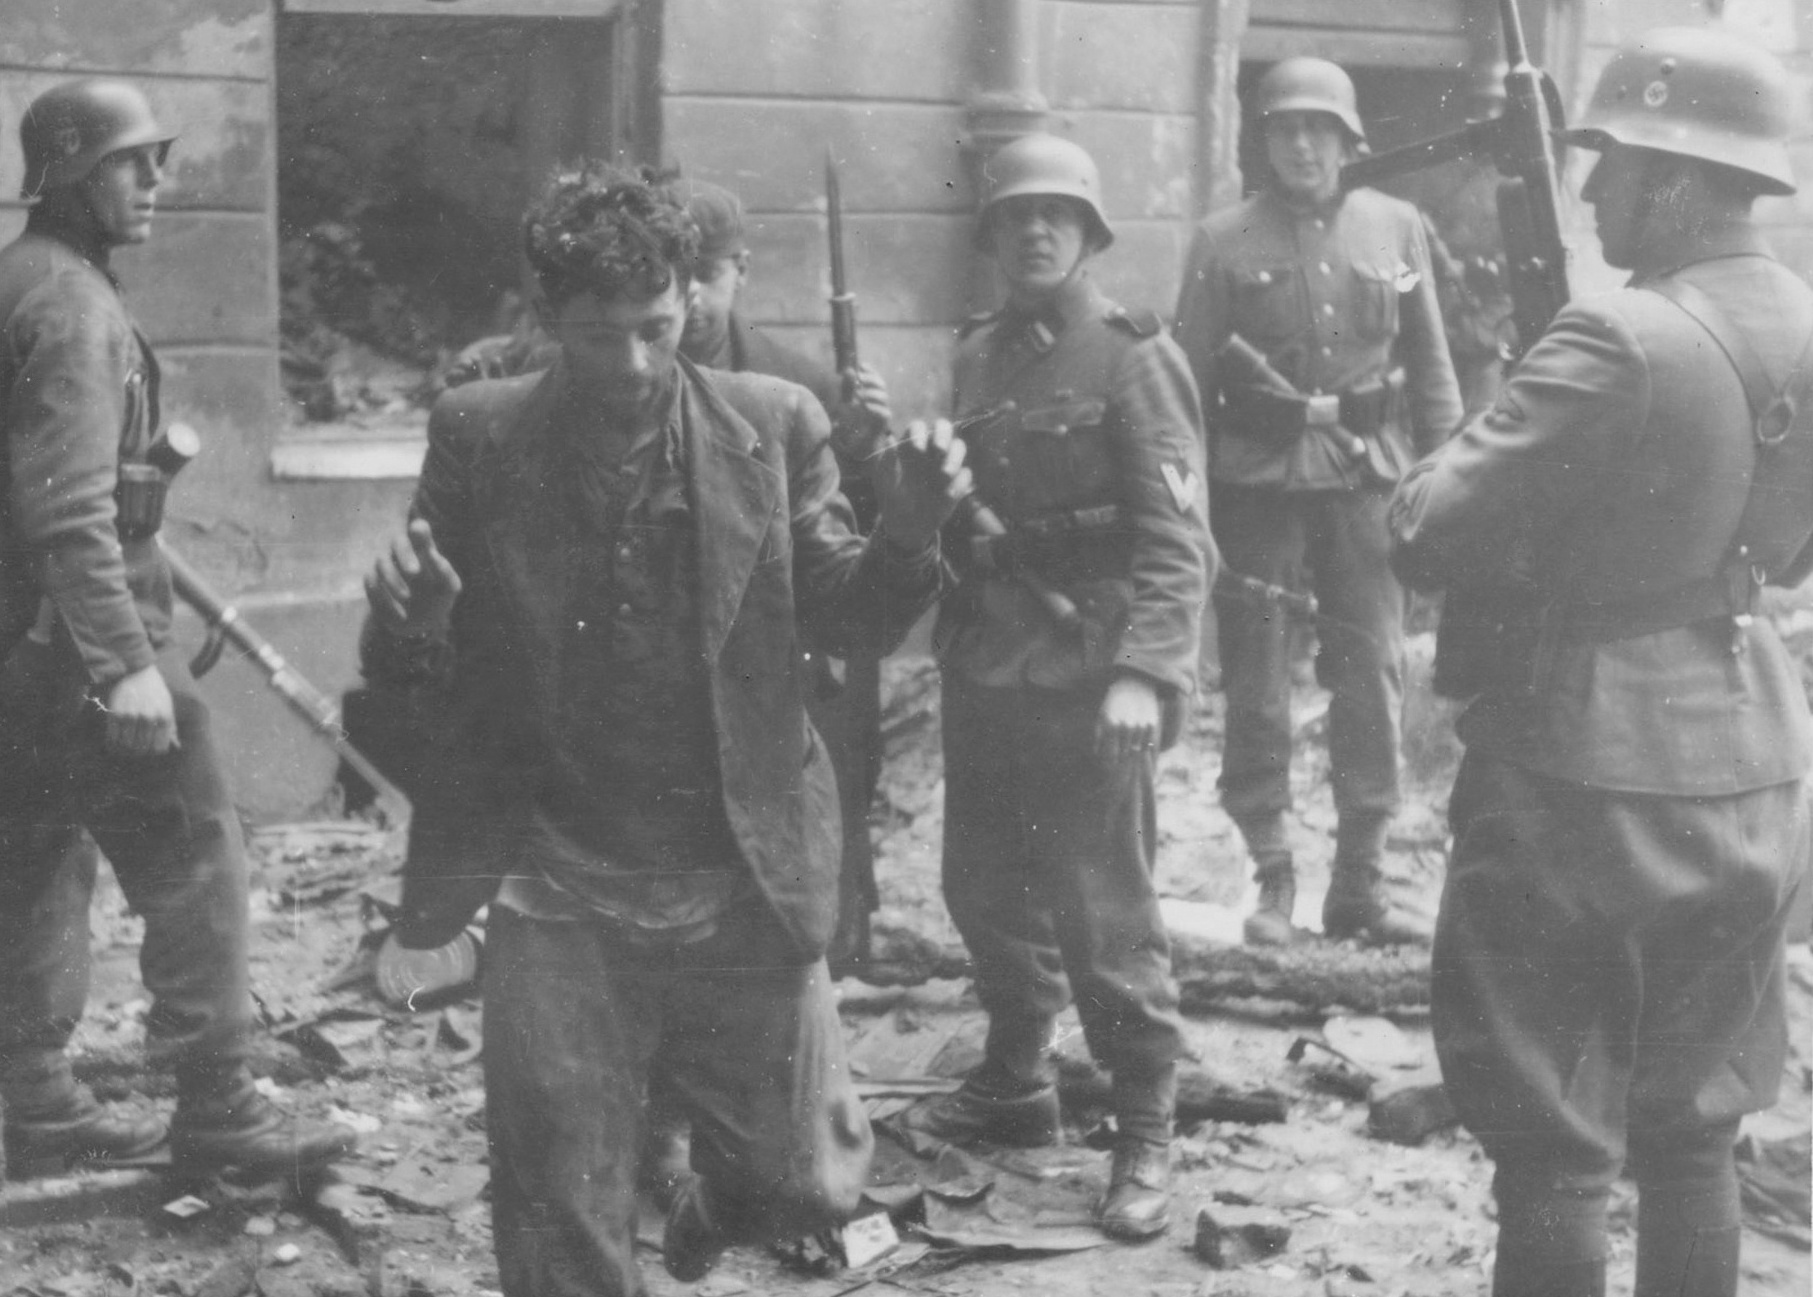 SS troops guarding suspected Jewish resistance fighters, Warsaw, Poland, Apr-May 1943